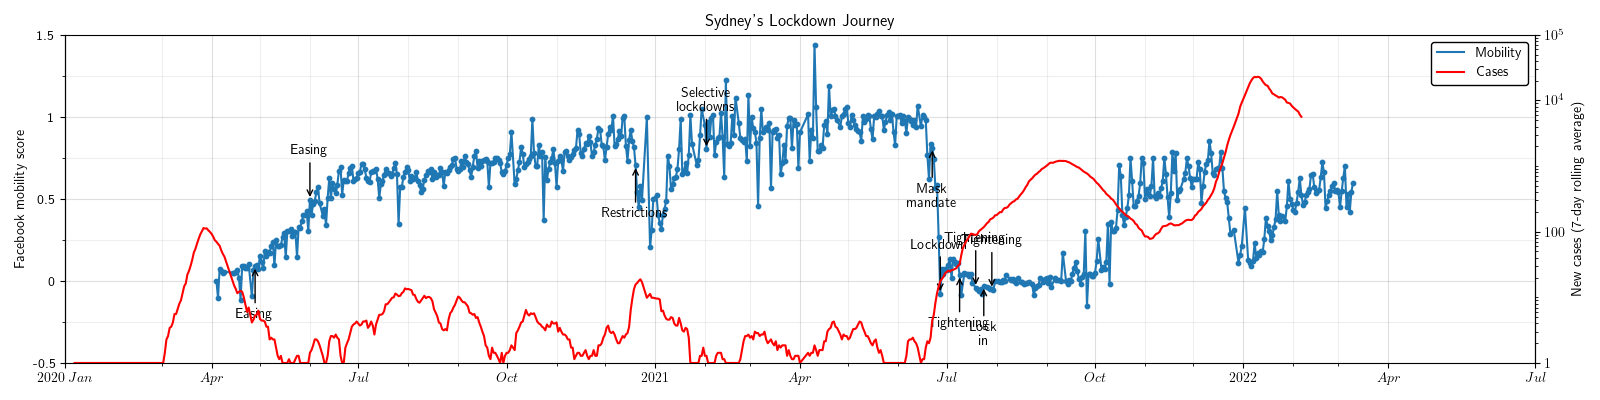 syd_simple_lga_facebook_mobility_score.png